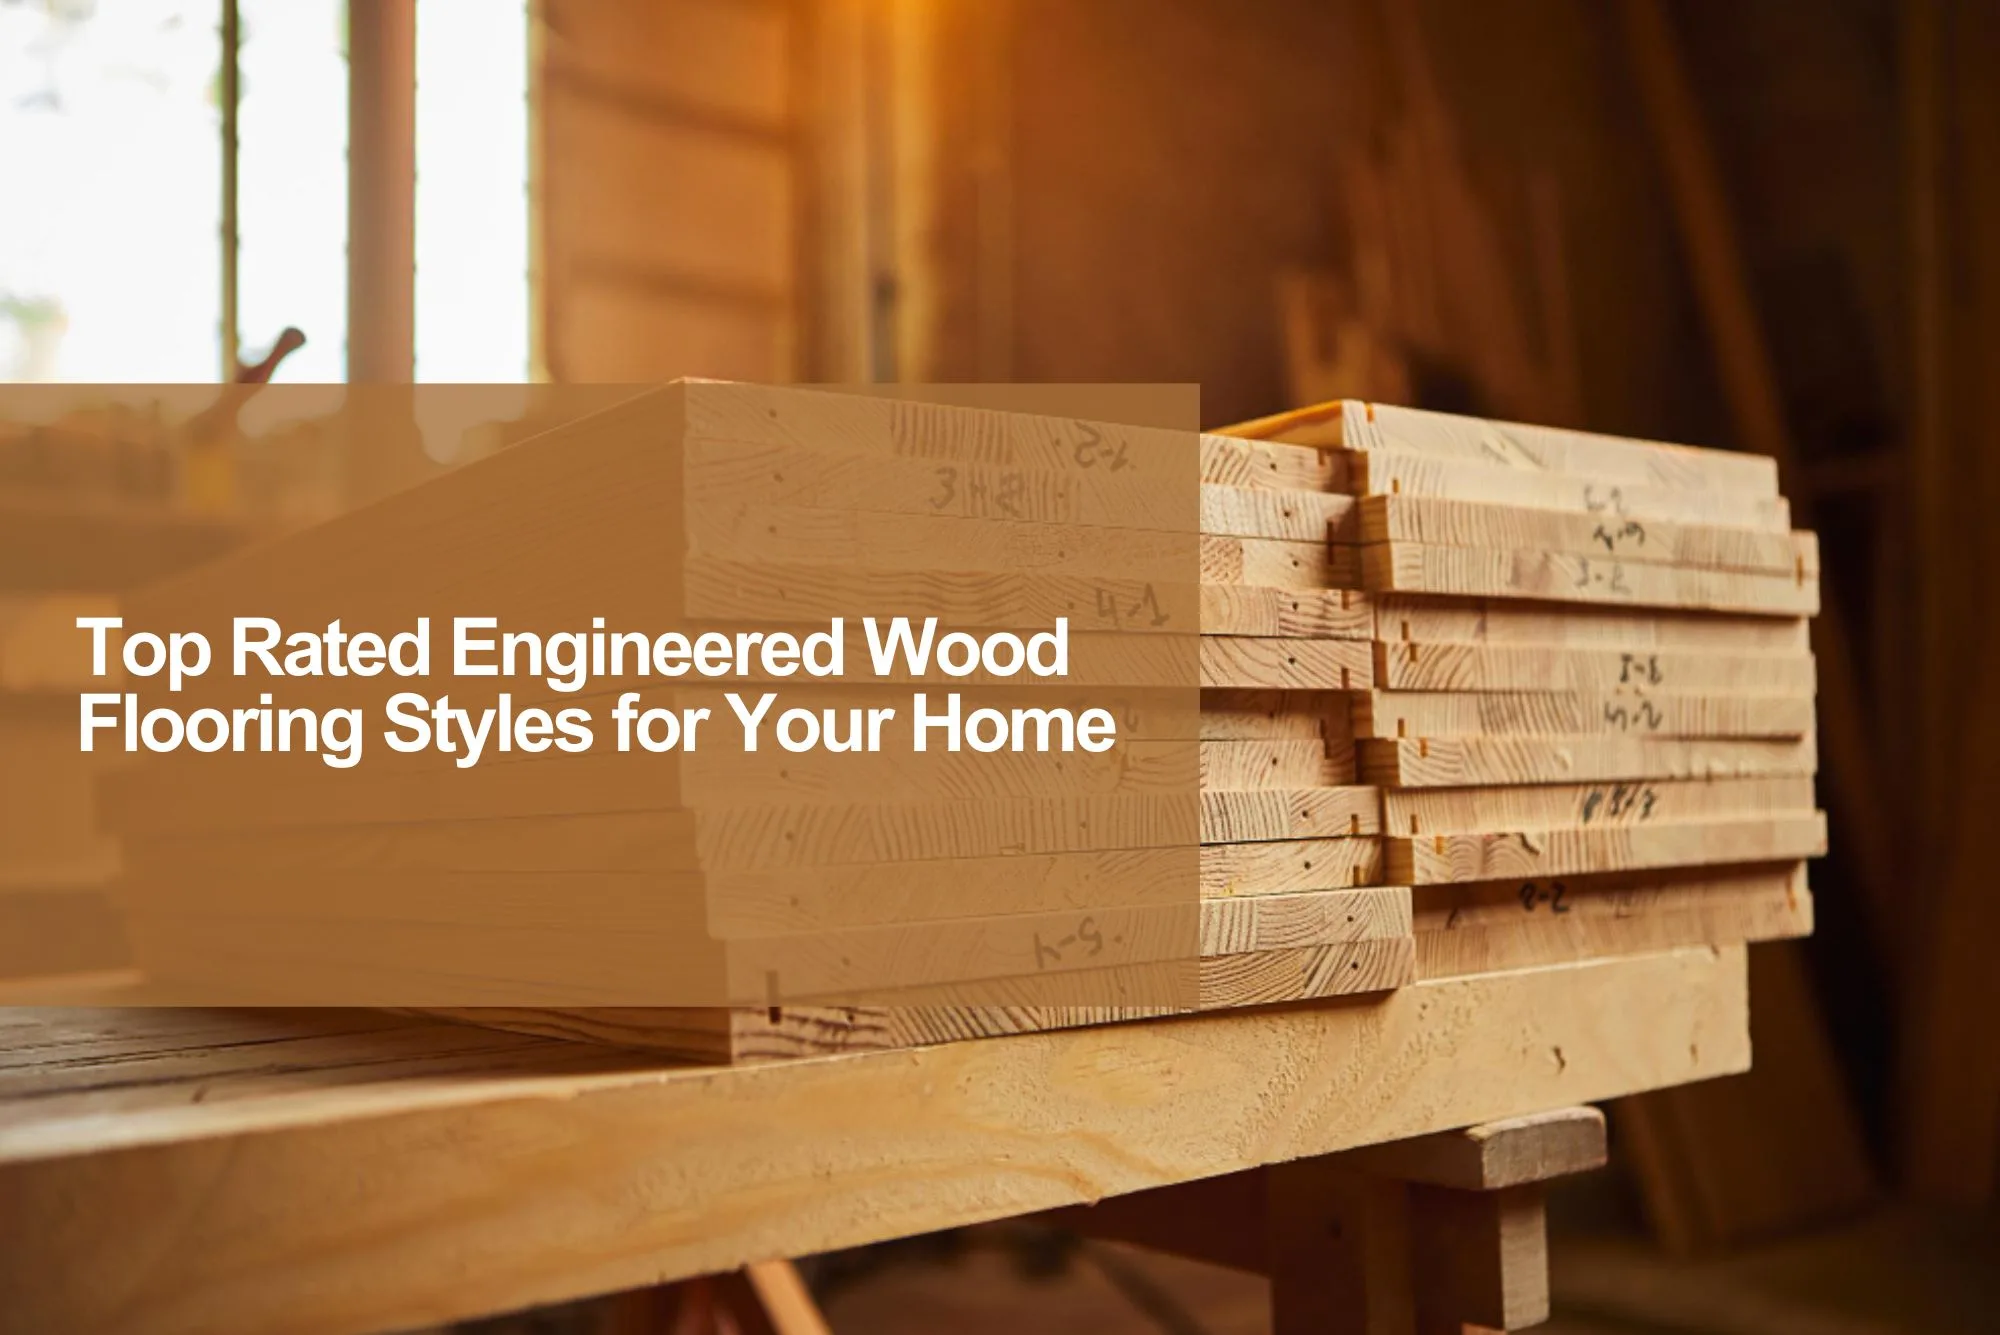 Top Rated Engineered Wood Flooring Styles for Your Home